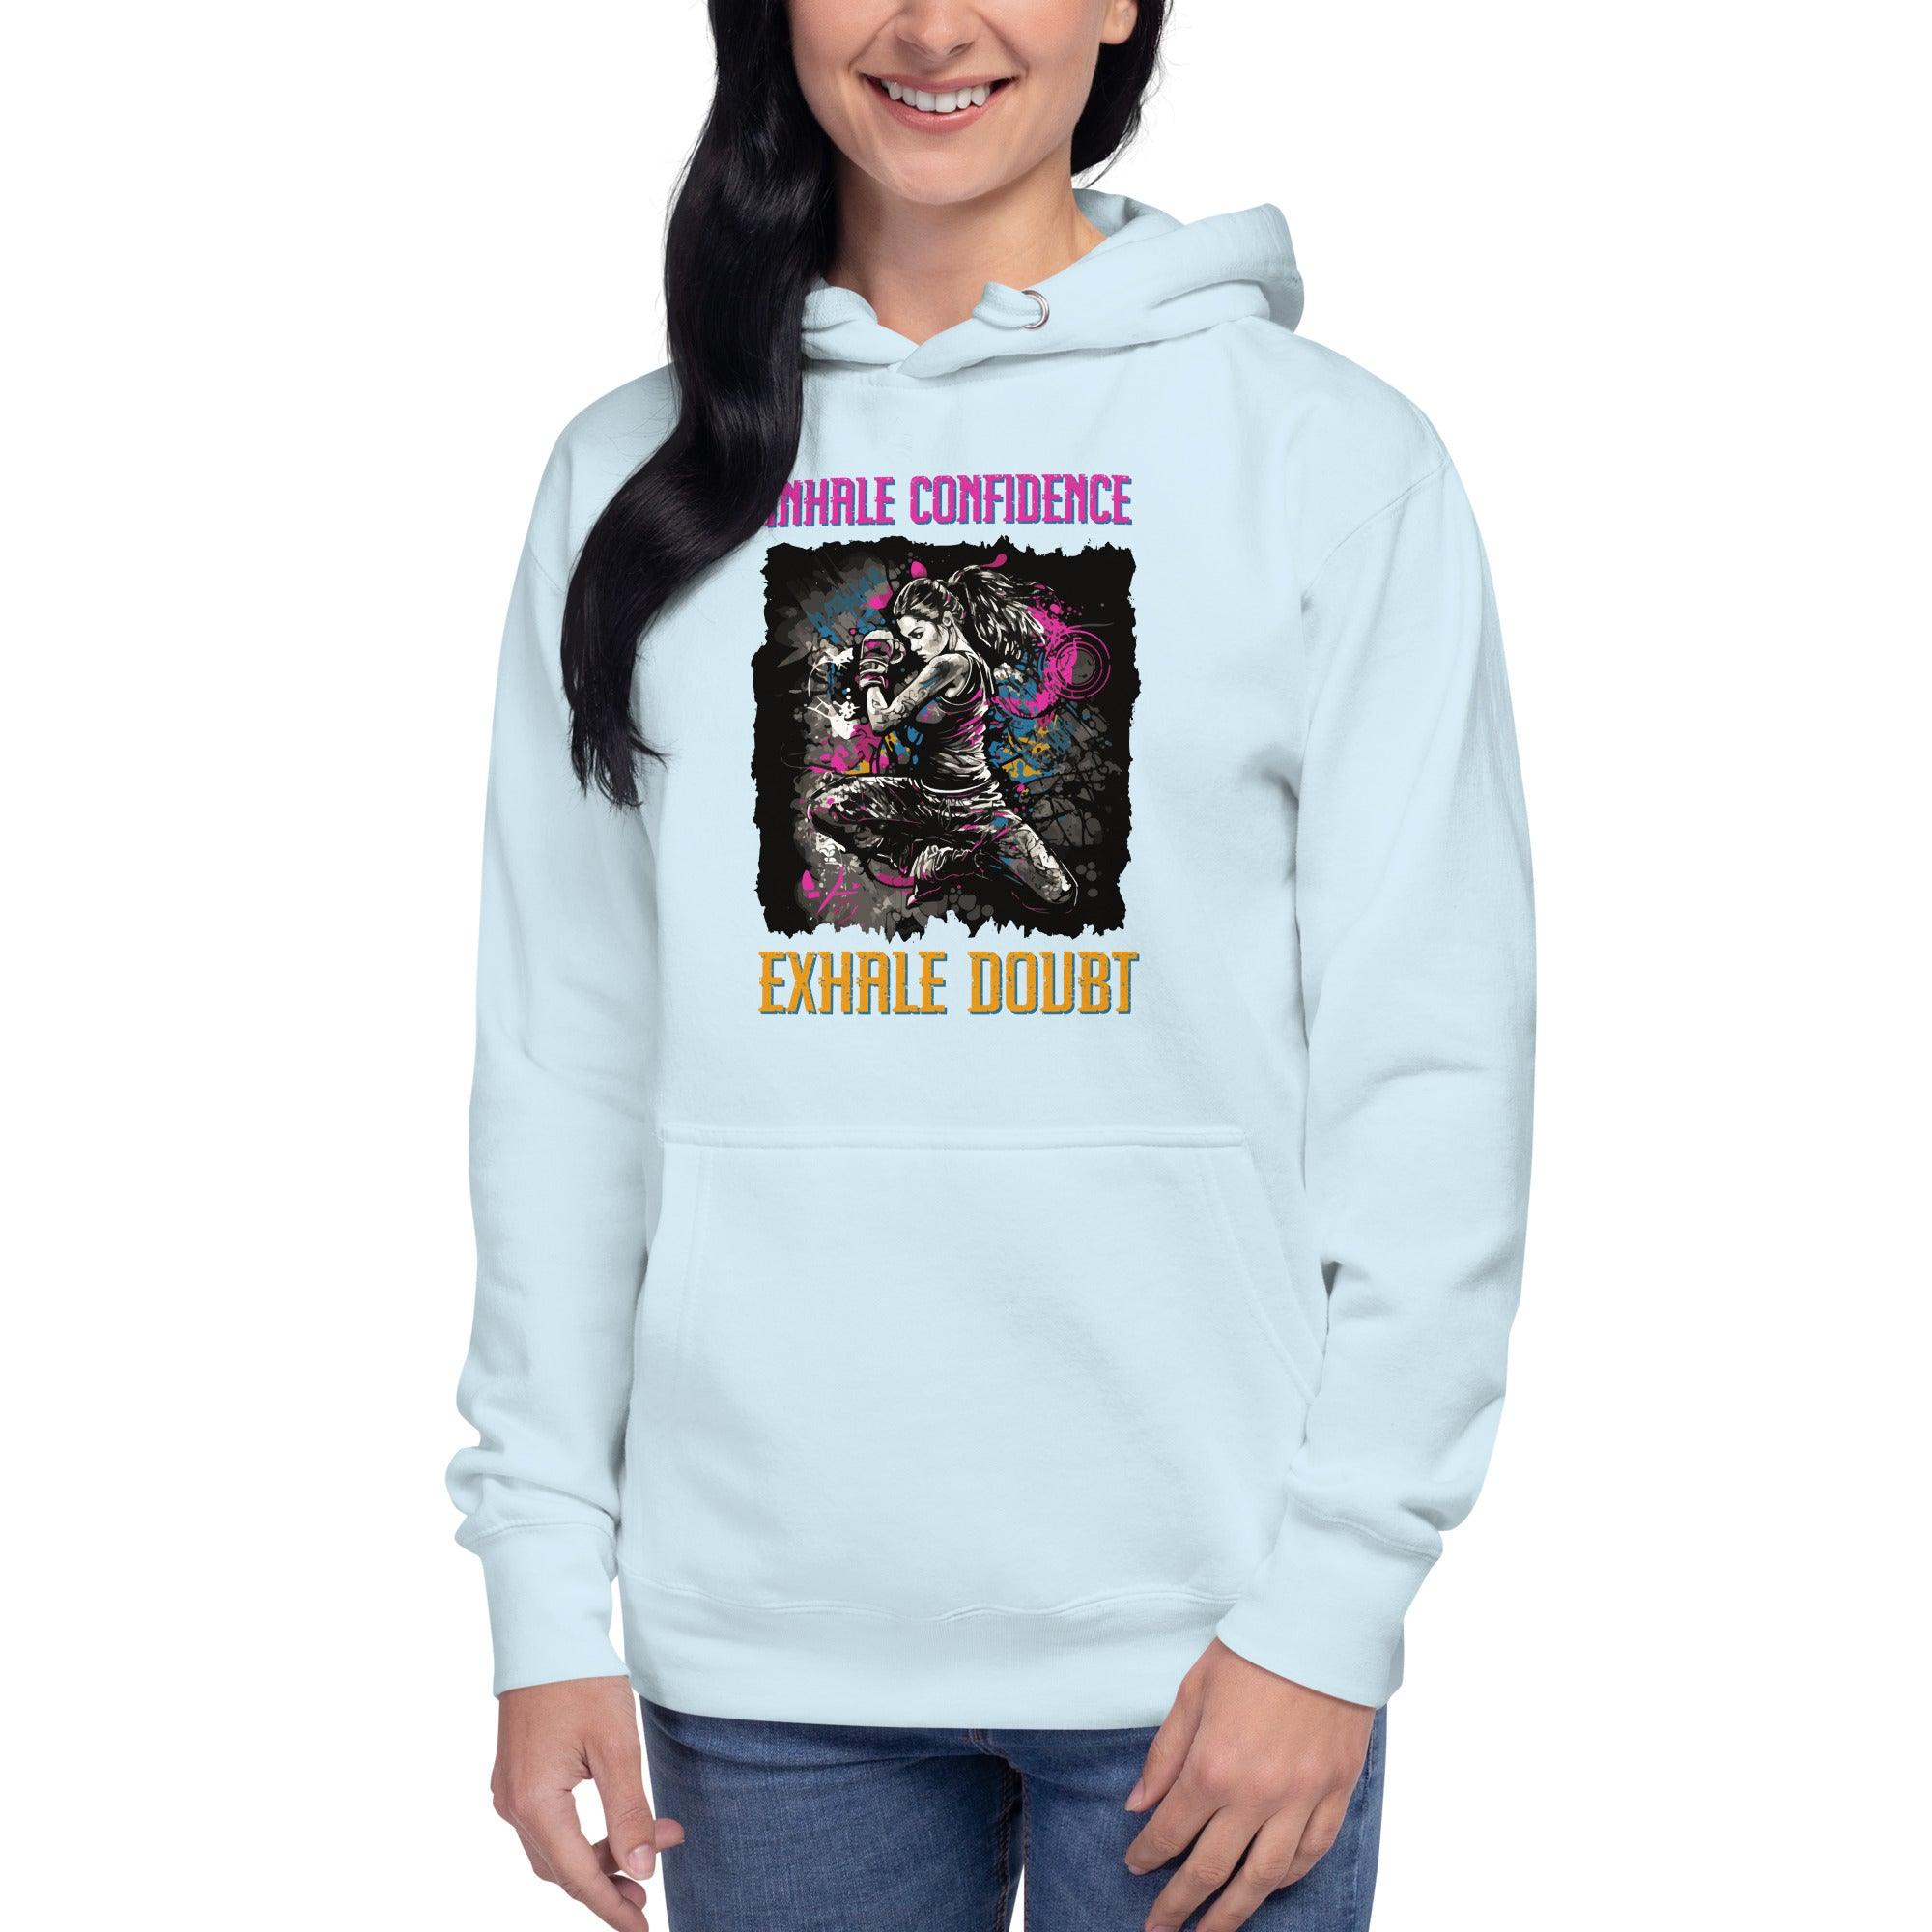 Inhale Confidence Exhale Doubt Unisex Hoodie - Beyond T-shirts